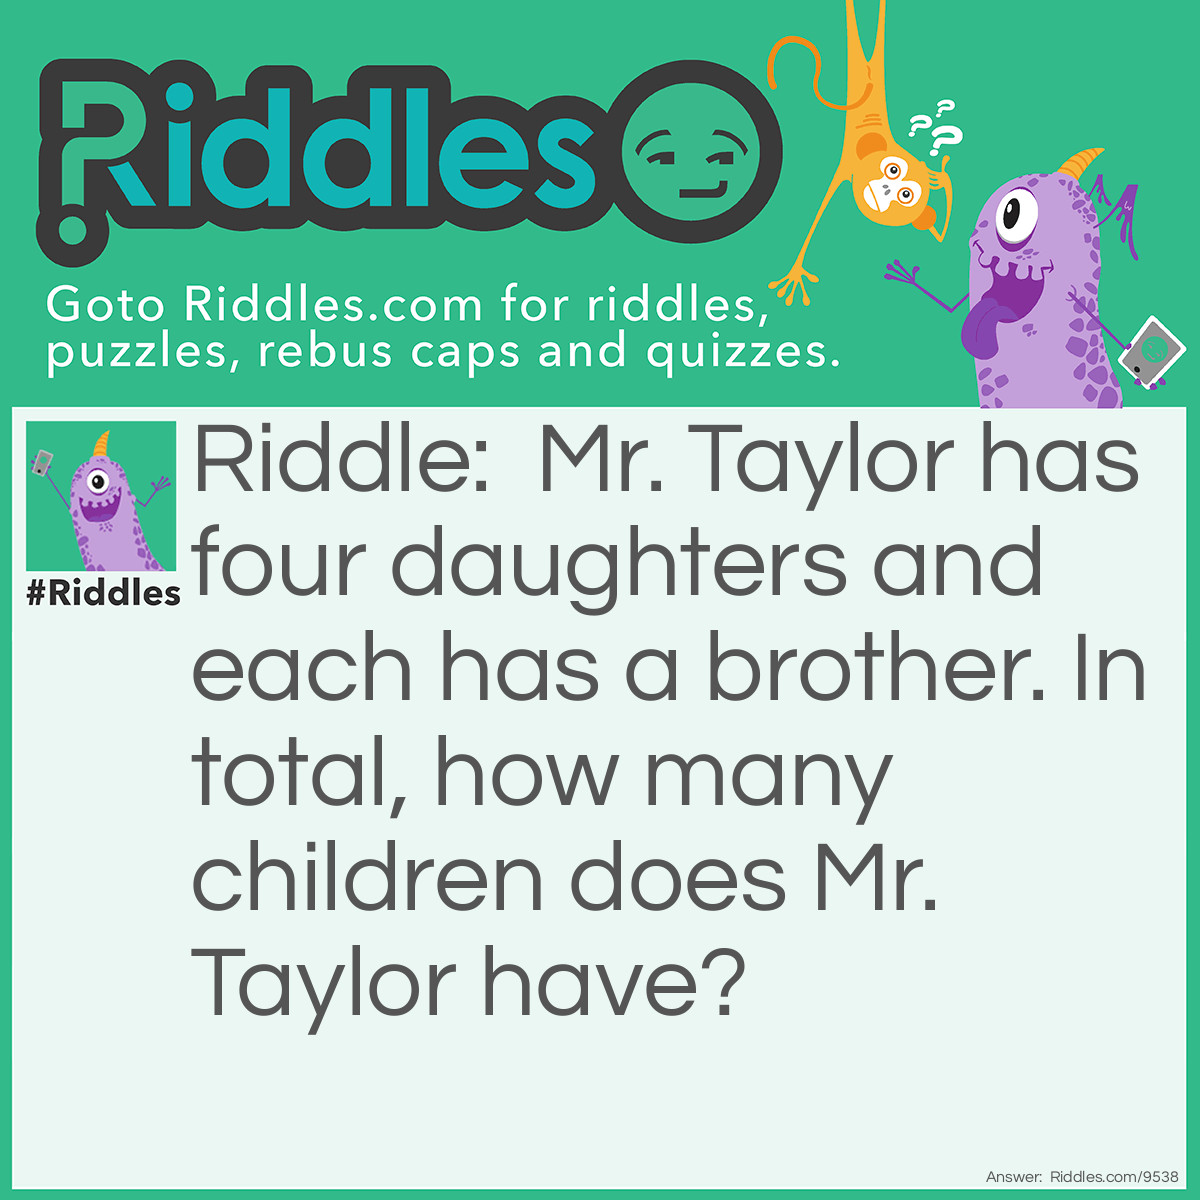 Riddle: Mr. Taylor has four daughters and each has a brother. In total, how many children does Mr. Taylor have? Answer: Five children because all of his daughters have the same brother.